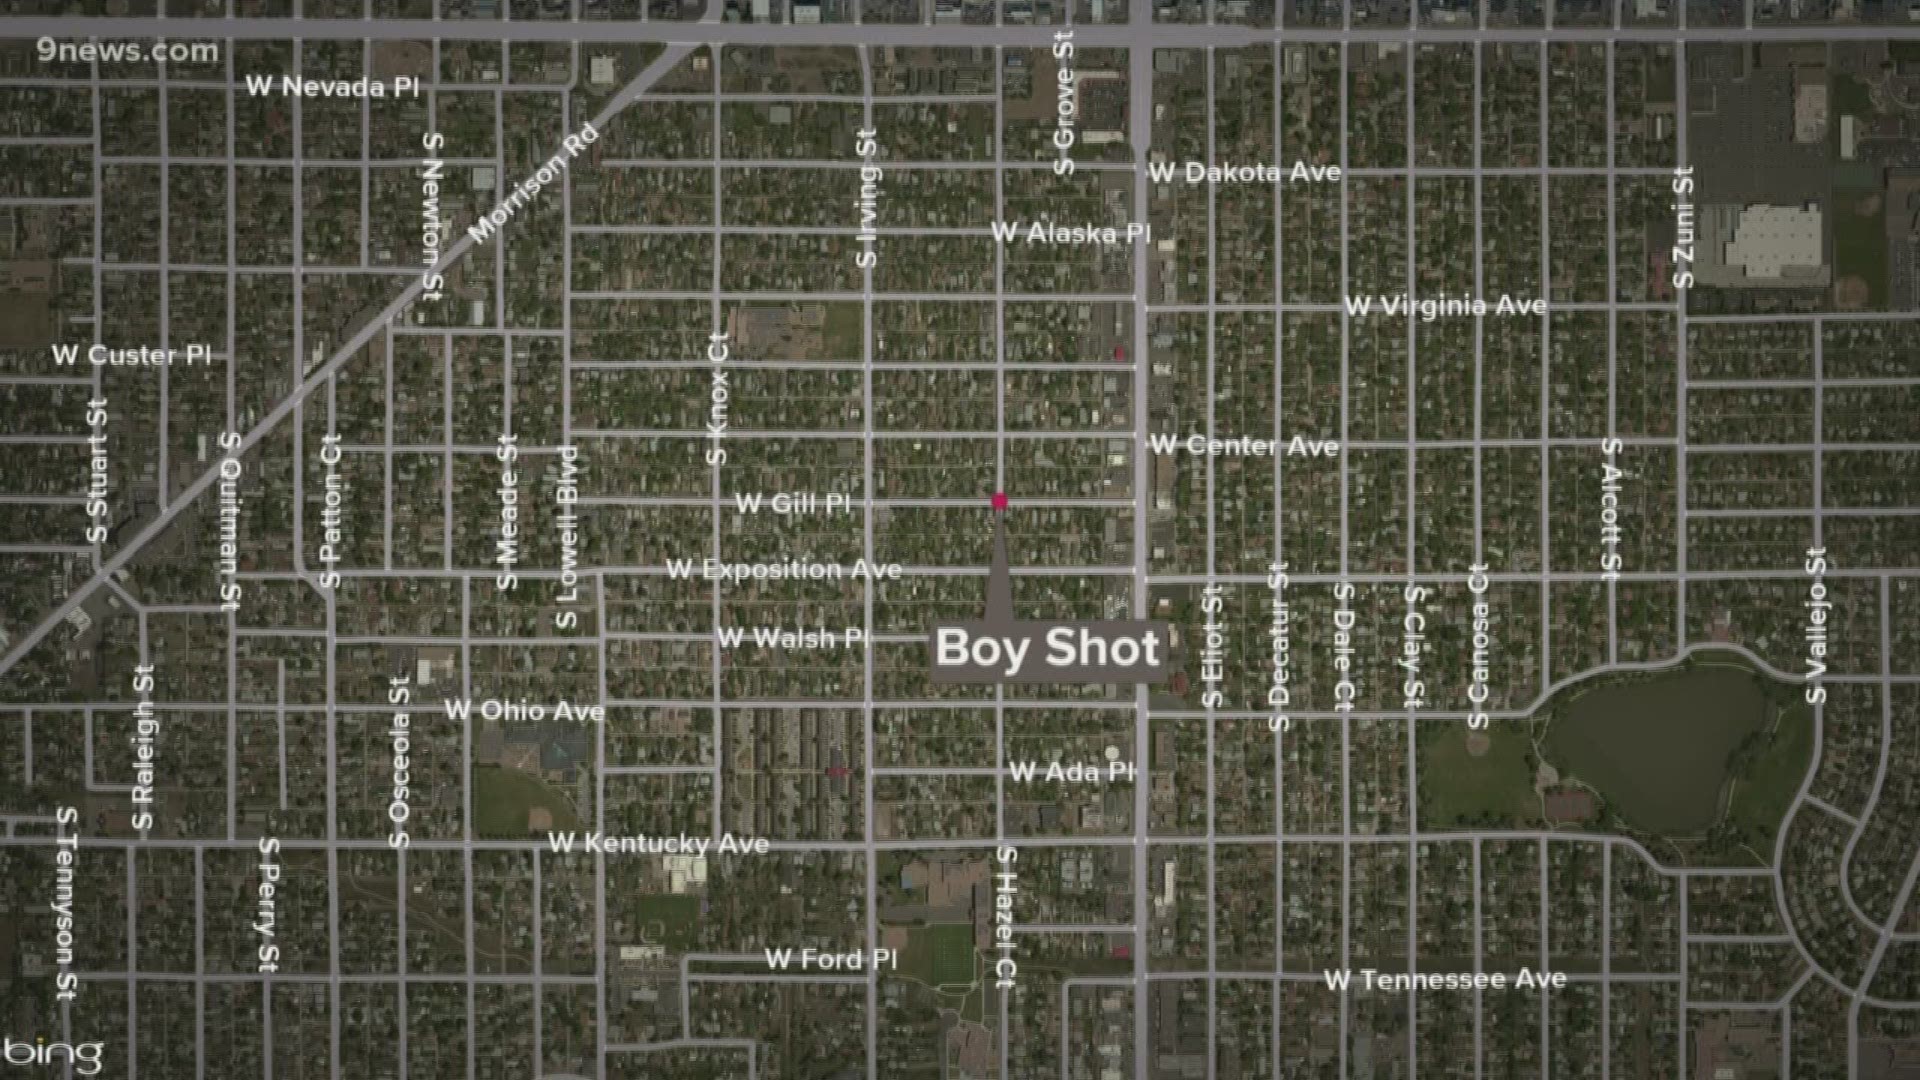 The shooting happened near South Federal Boulevard and West Exposition Avenue.